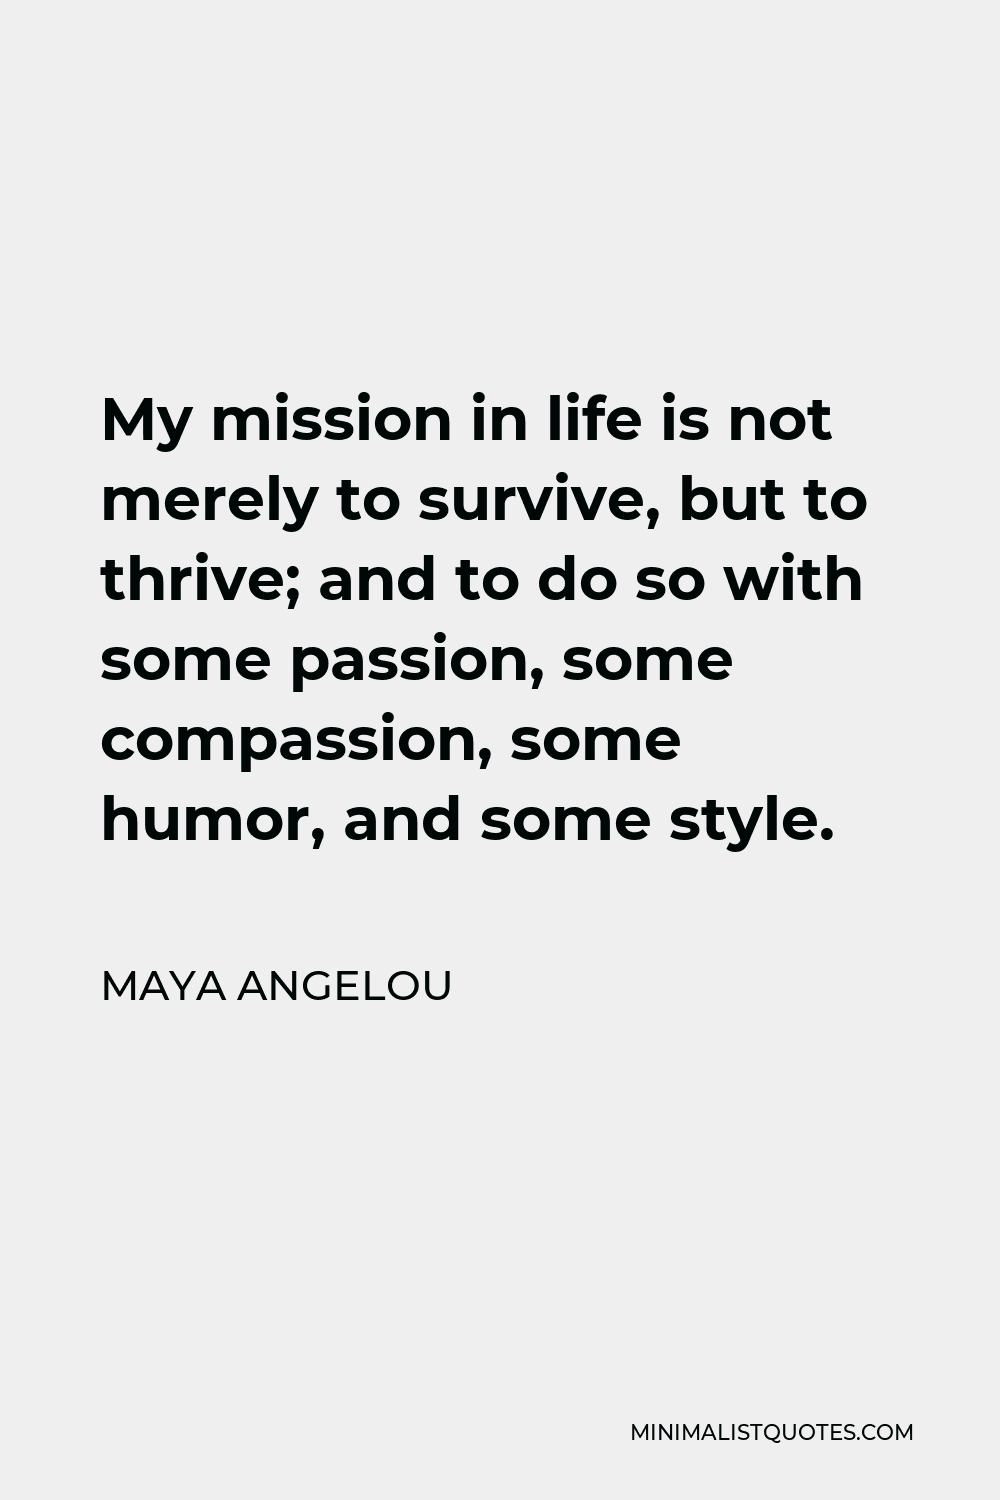 Maya Angelou Quote, My mission in life is not merely to survive